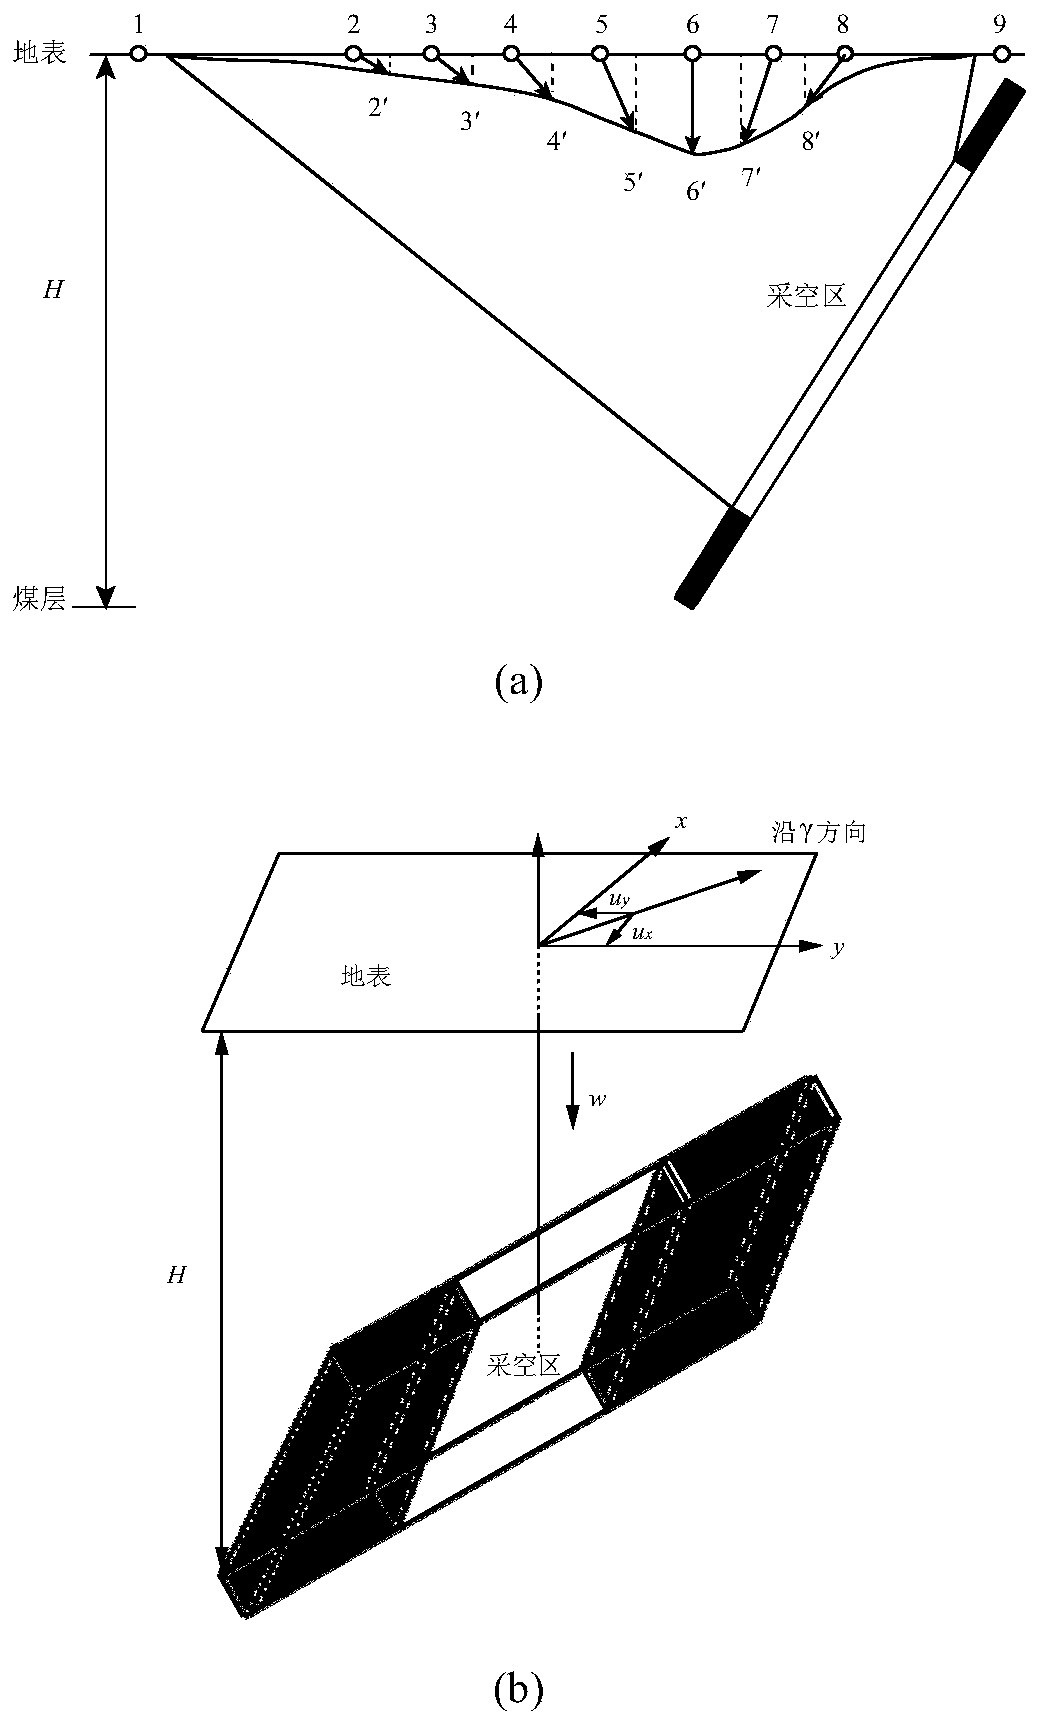 A method for predicting the distribution of surface cracks induced by underground mining of side walls in open-pit mines